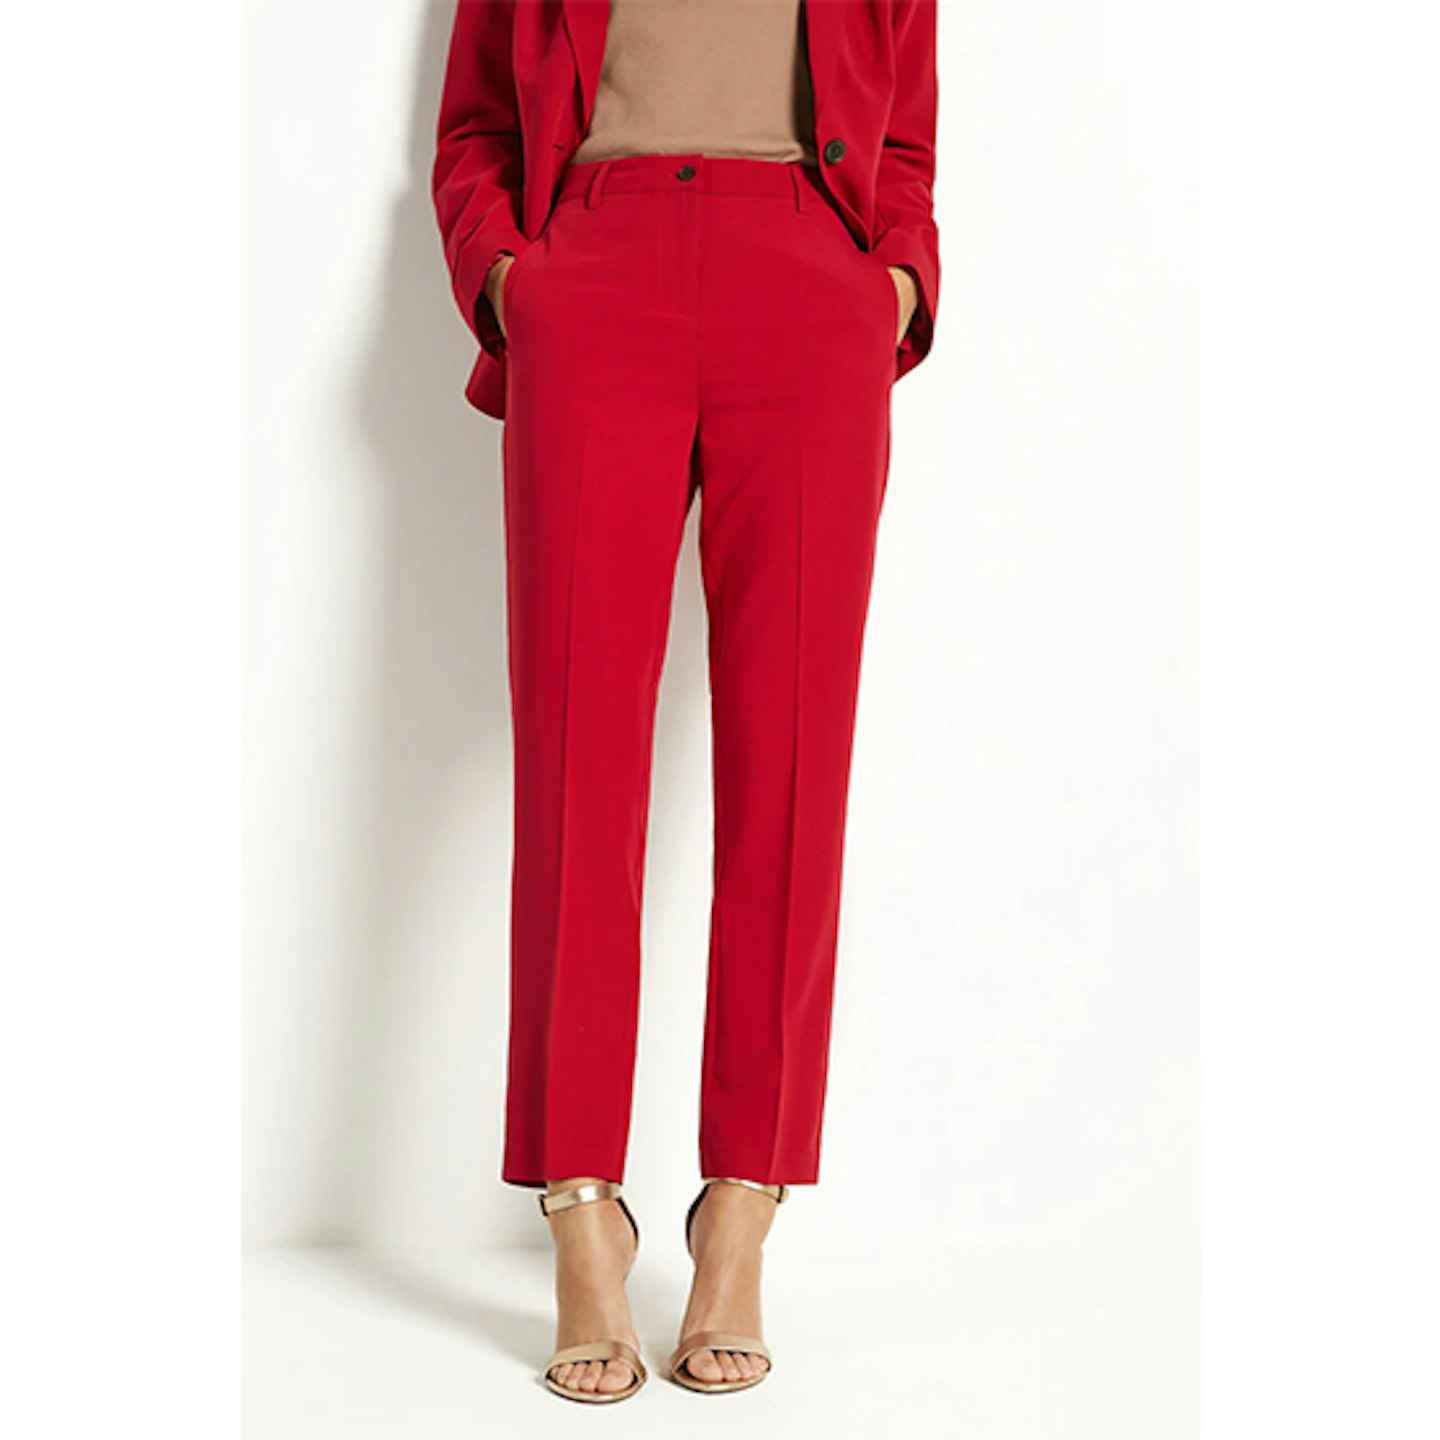 Red tailored trousers